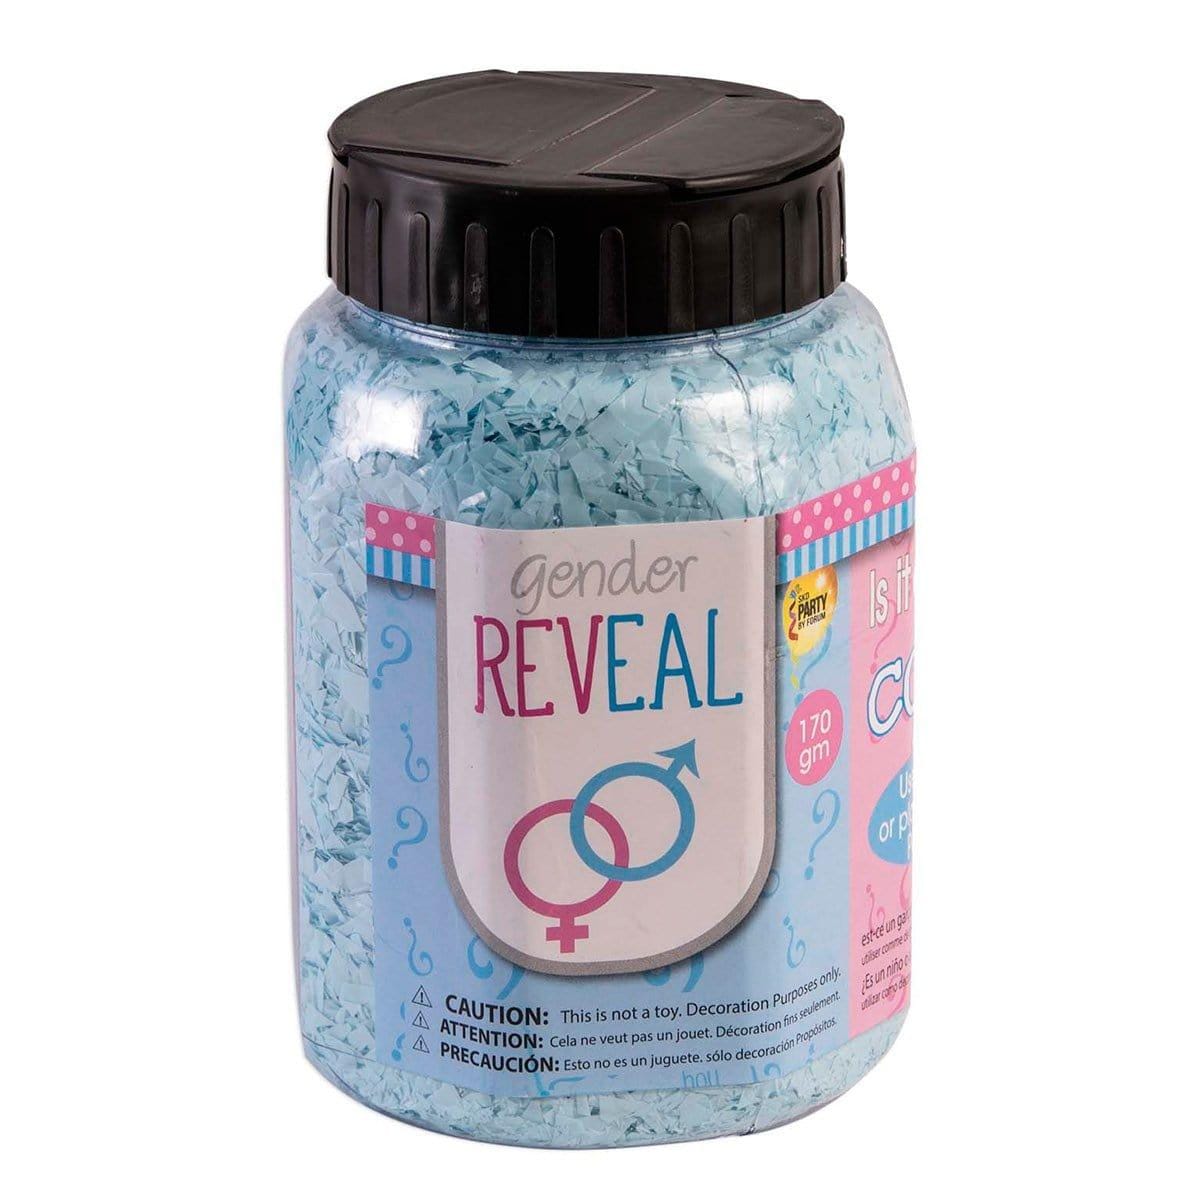 Buy Balloons Light Blue Confetti Jar, 170g sold at Party Expert